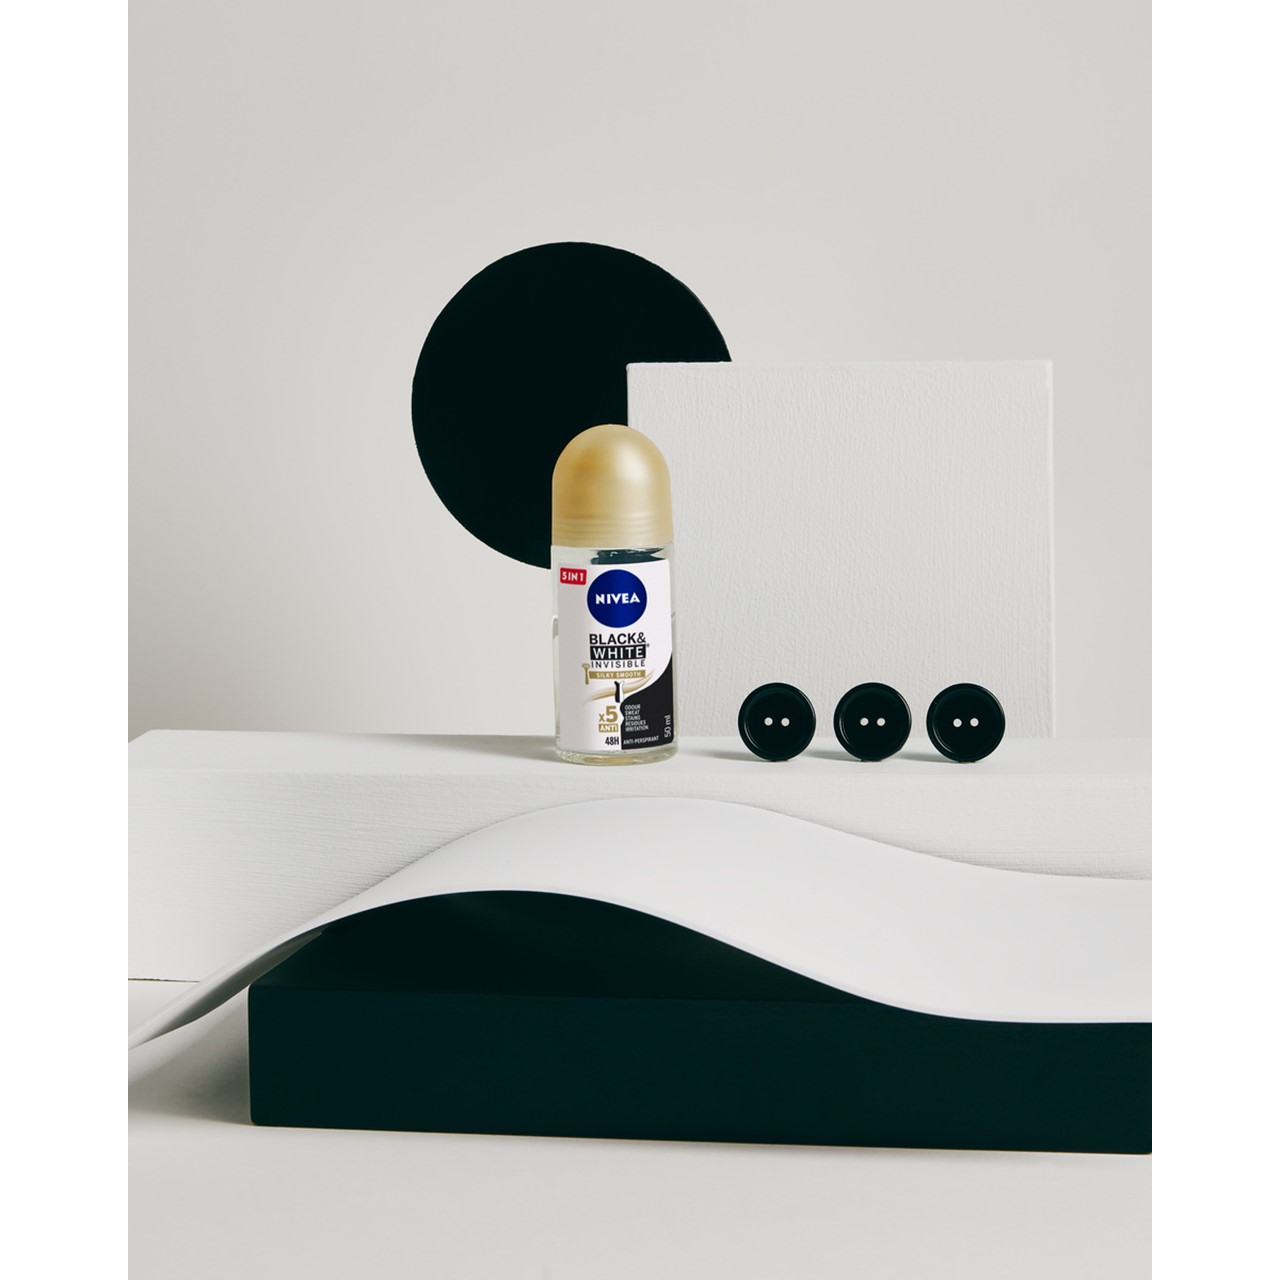 https://static.beautytocare.com/cdn-cgi/image/width=1600,height=1600,f=auto/media/catalog/product//n/i/nivea-black-white-invisible-silky-smooth-roll-on-50ml_1.jpg